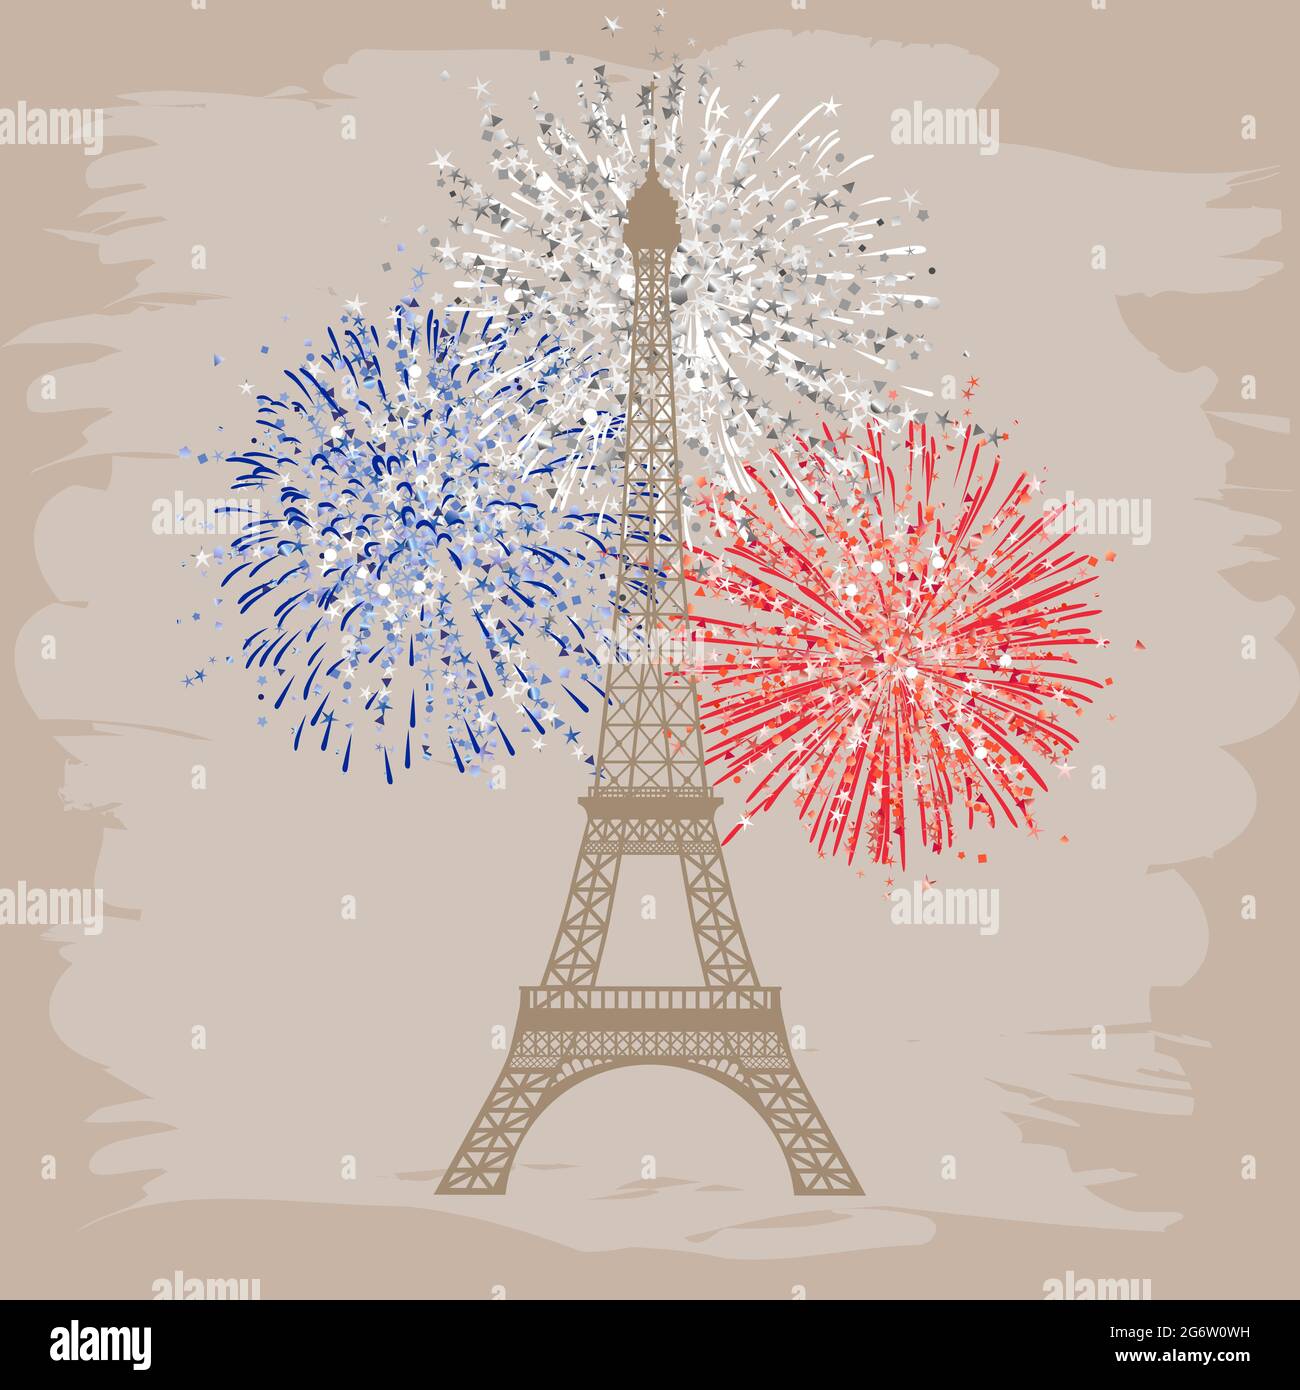 State French holidays congrats concept. Eiffel tower decorative romantic image. Monochrome silhouette and colorful fireworks explosion. Symbol of Pari Stock Vector